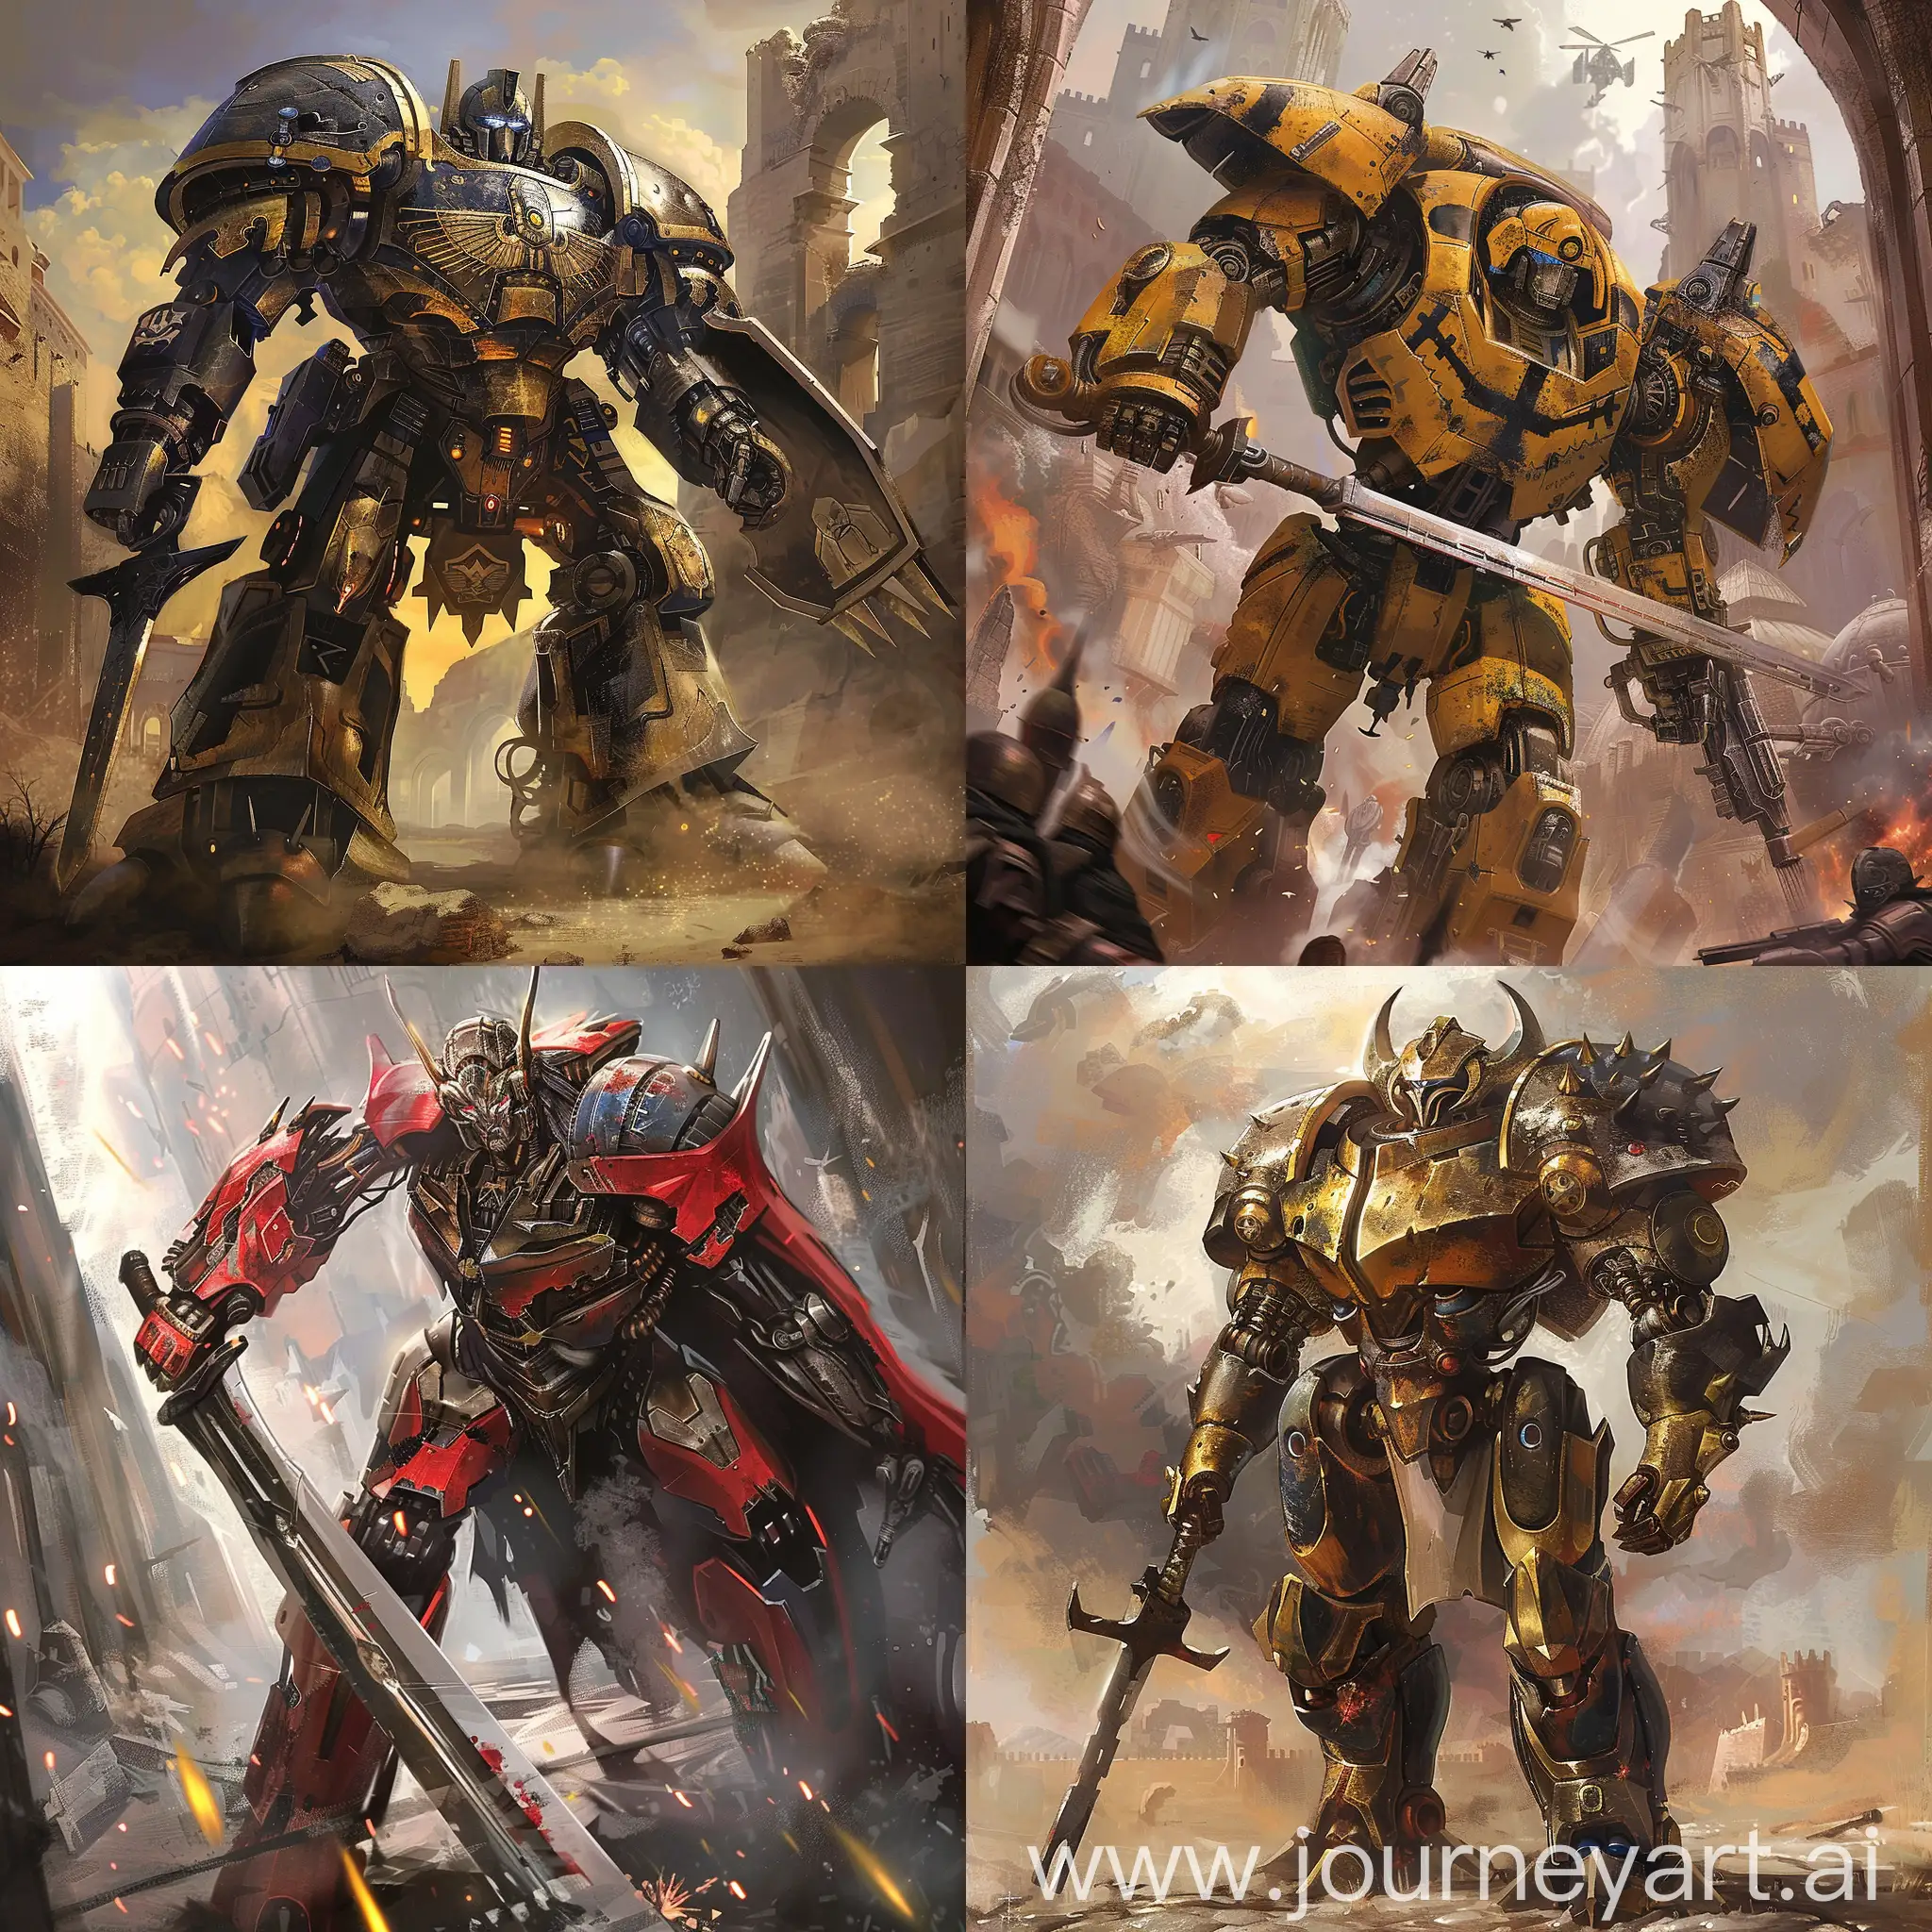 Transformers-in-Medieval-Prehistoric-Ancient-and-Futuristic-Styles